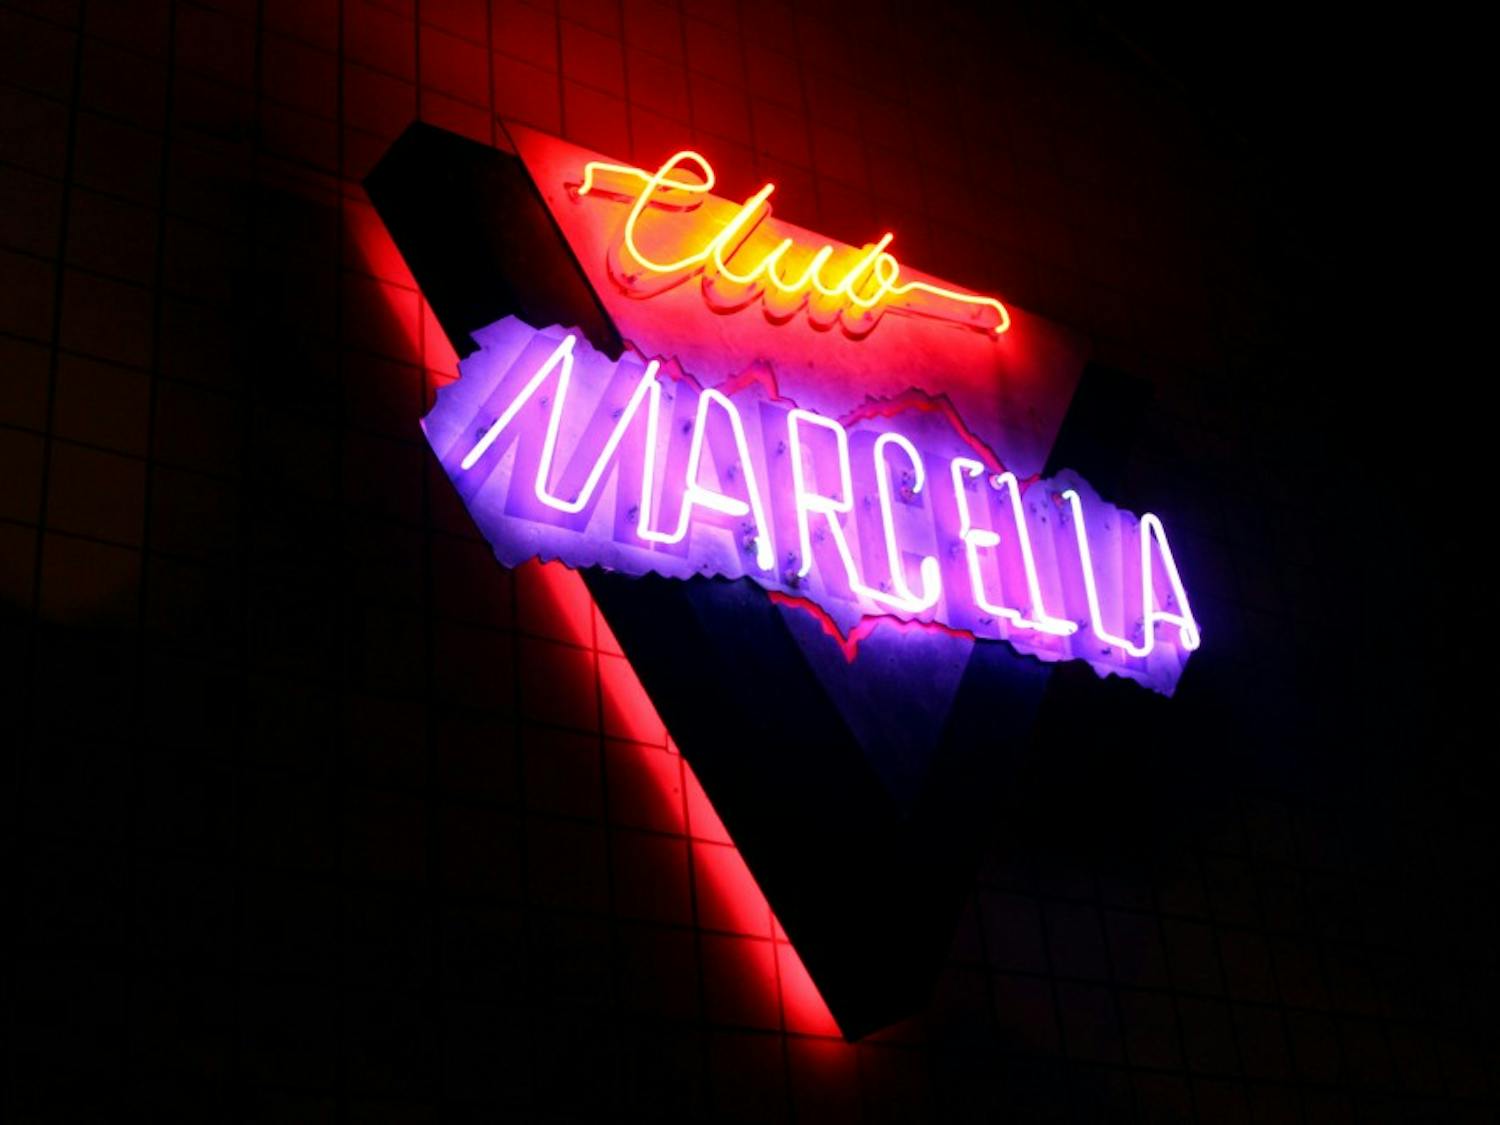 Club Marcella is the oldest and largest gay nightclub in Western New York and has been around for 22 years. The club is located on Pearl Street right off of Chippewa Street in the heart of downtown Buffalo.